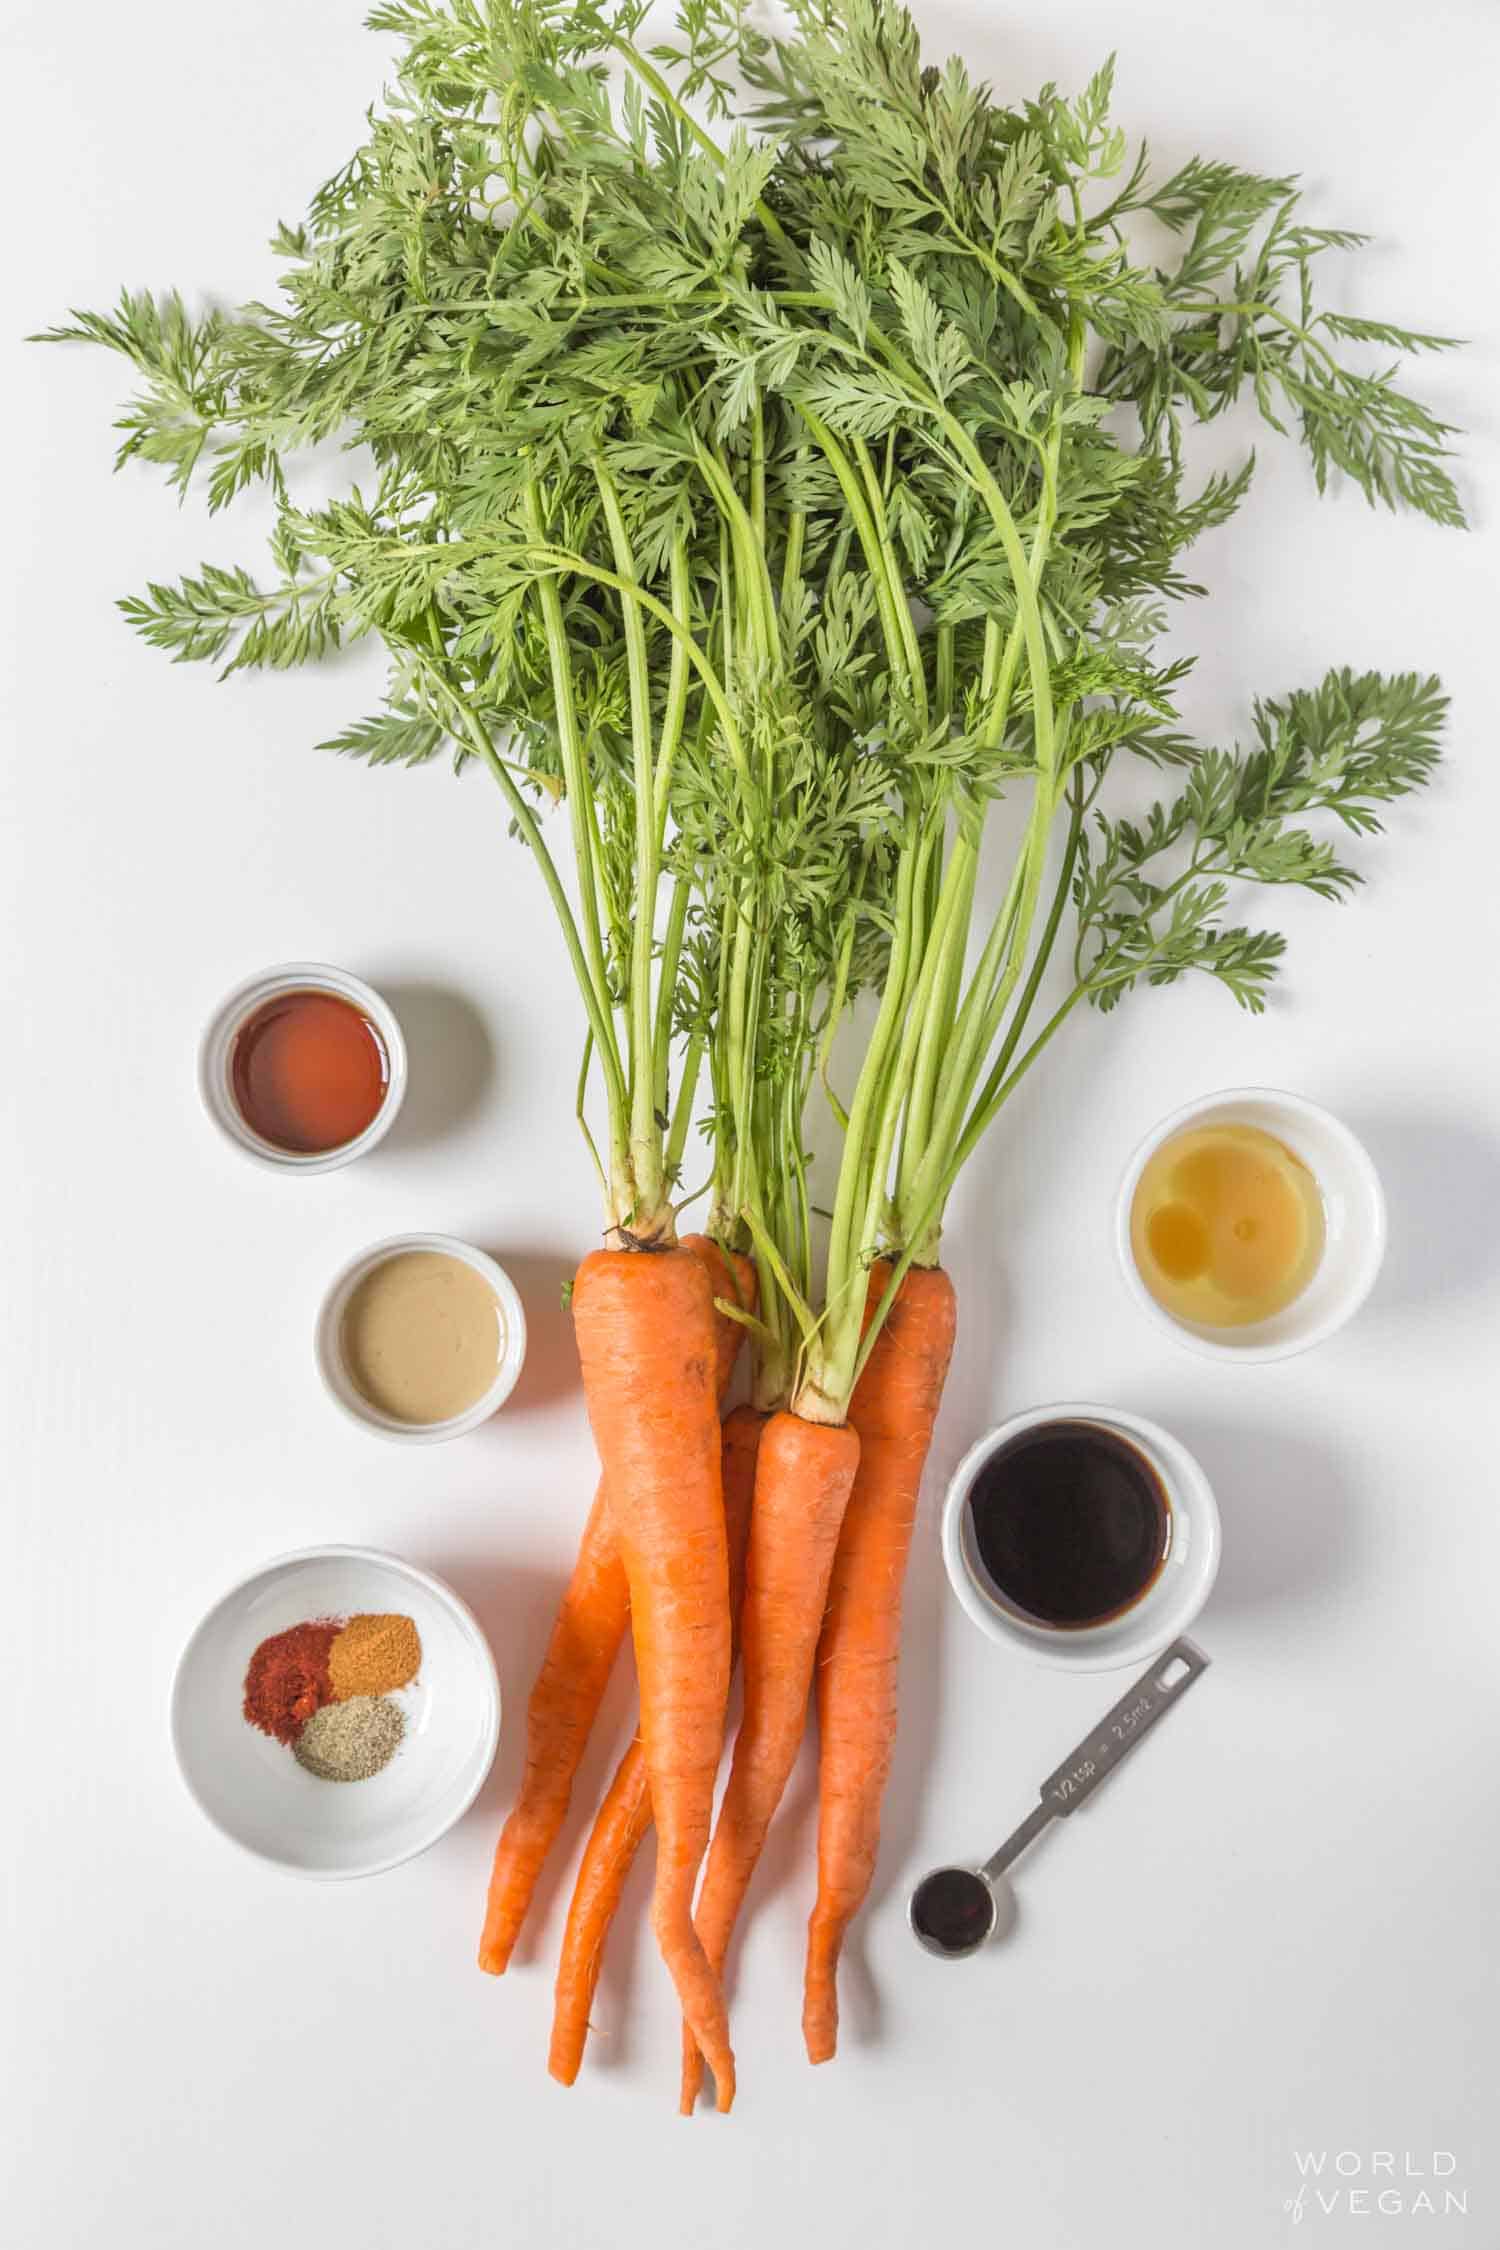 carrot bacon ingredients flatlay with a big bunch of carrots with the green carrot tops